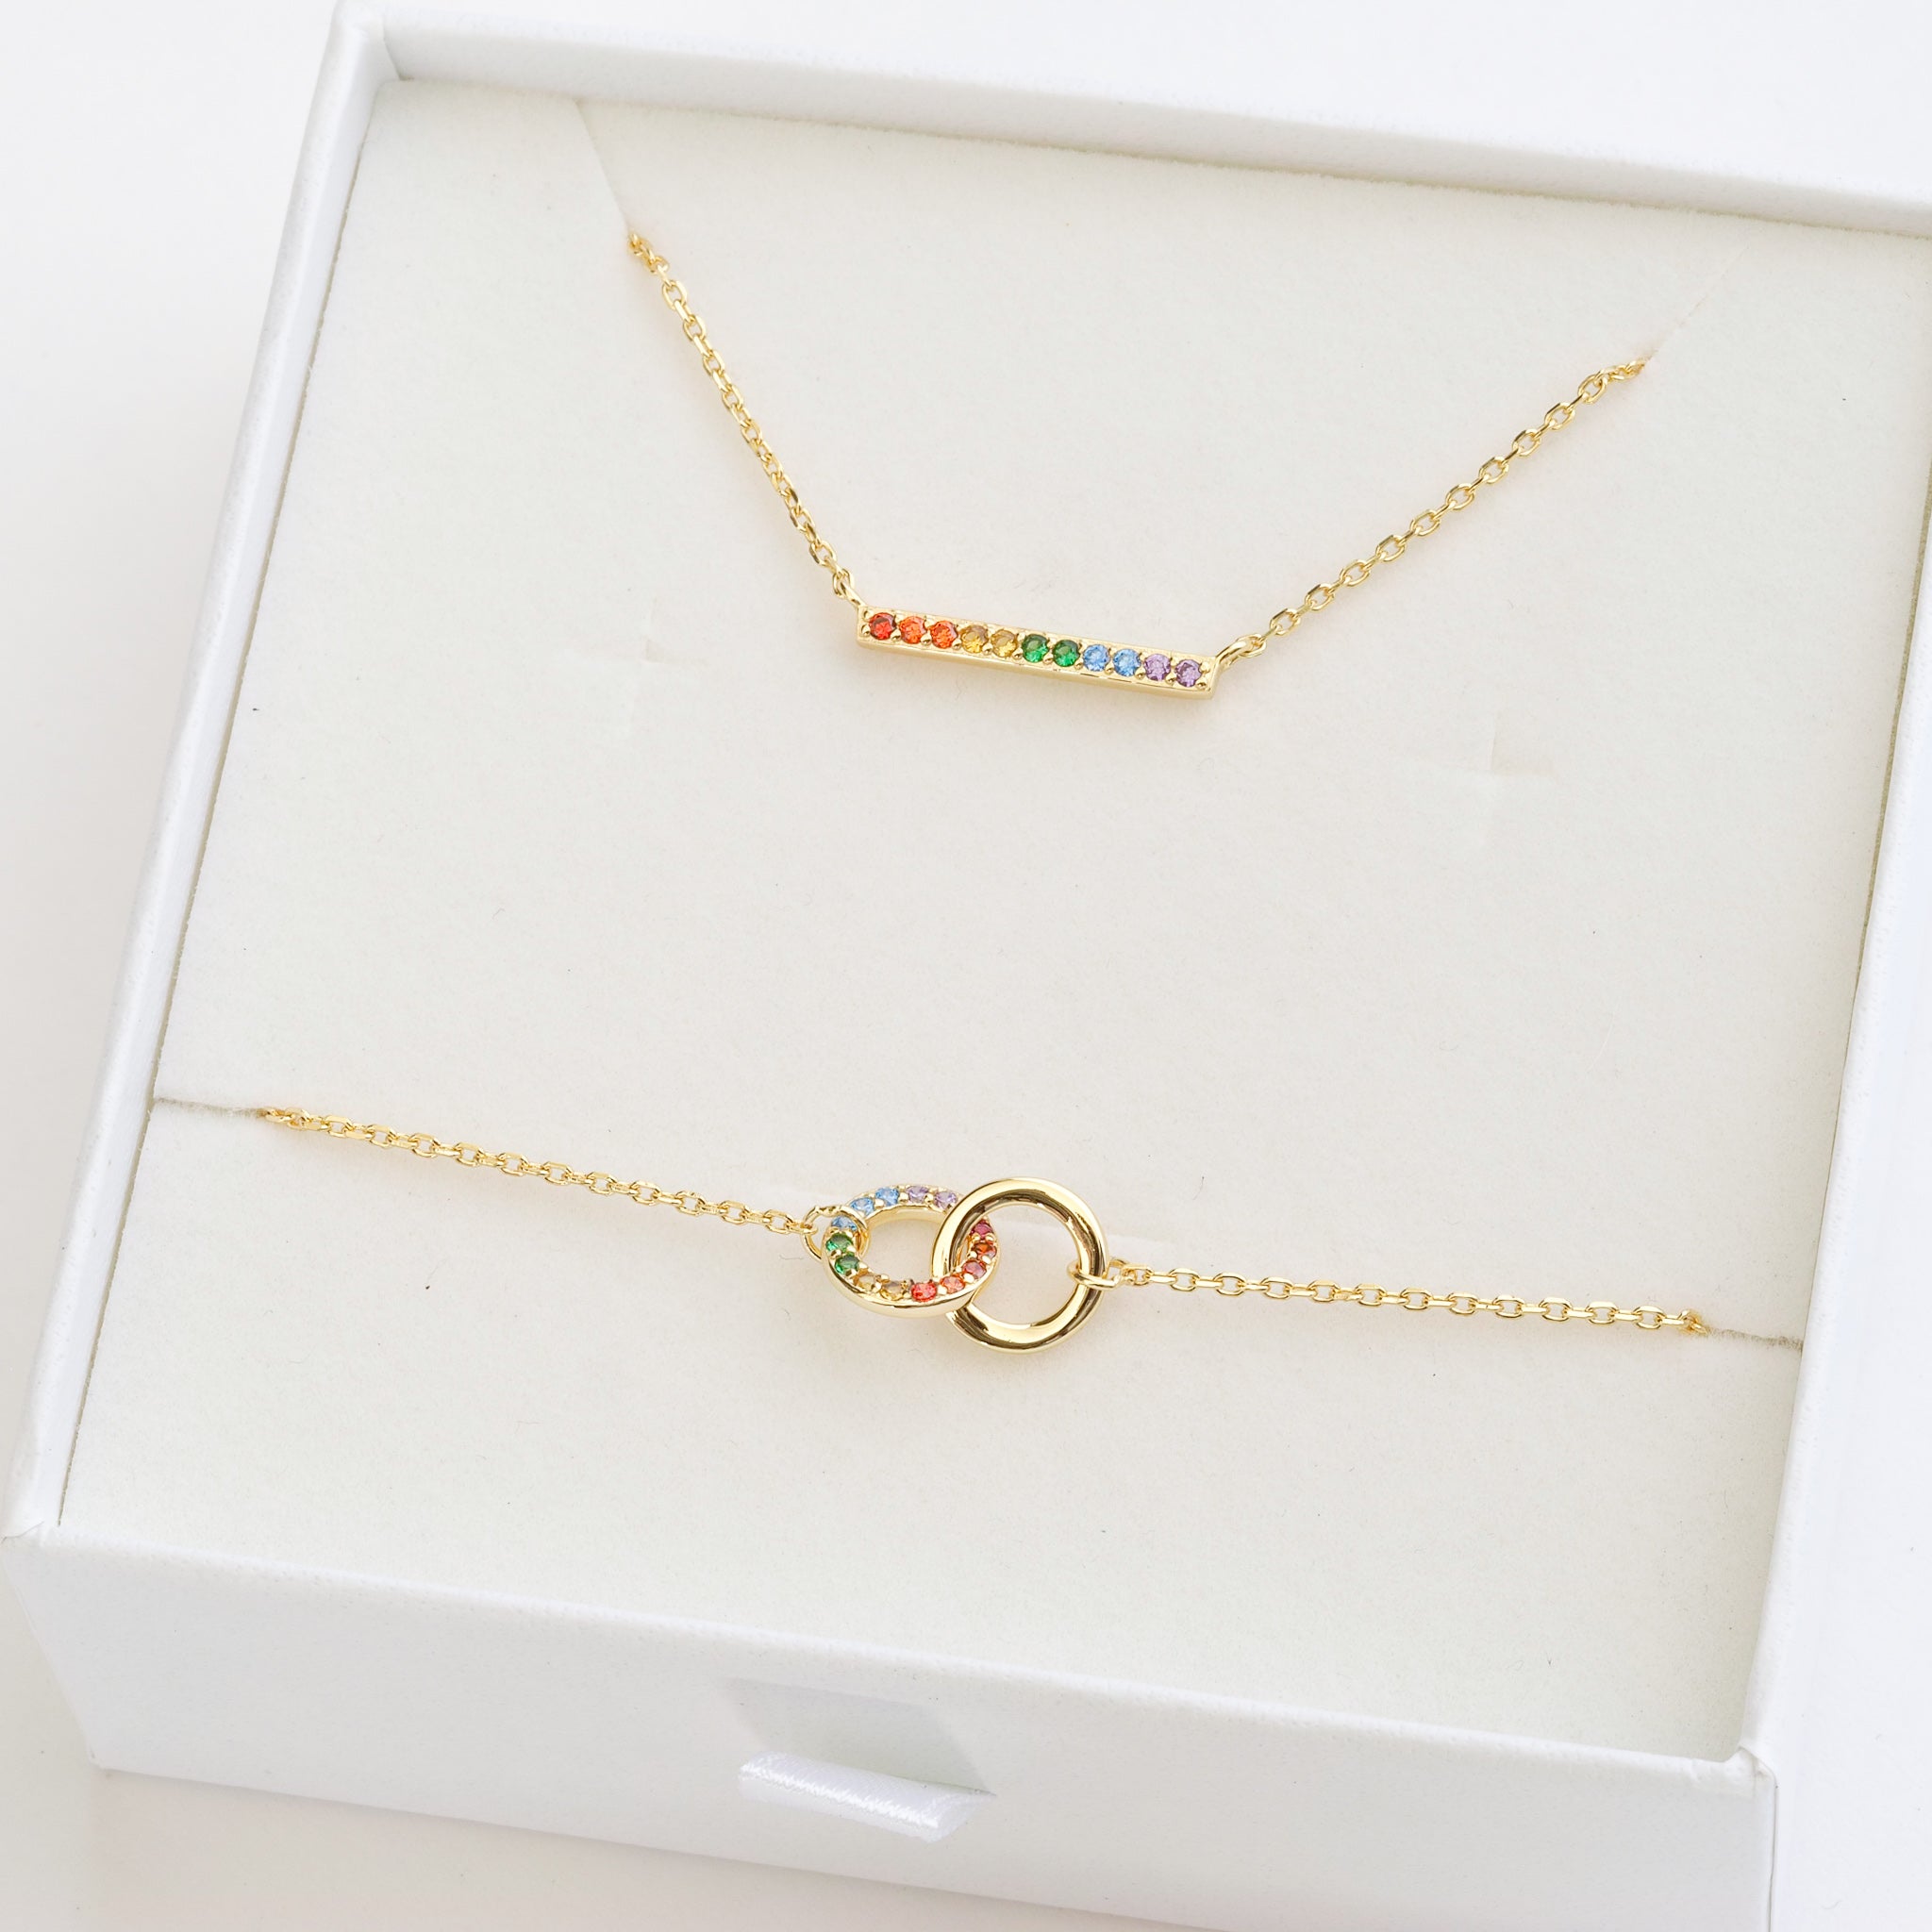 pride flag jewellery set featuring rainbow pride necklace and rainbow pride bracelet perfect as LGBTQI+ gift - gold